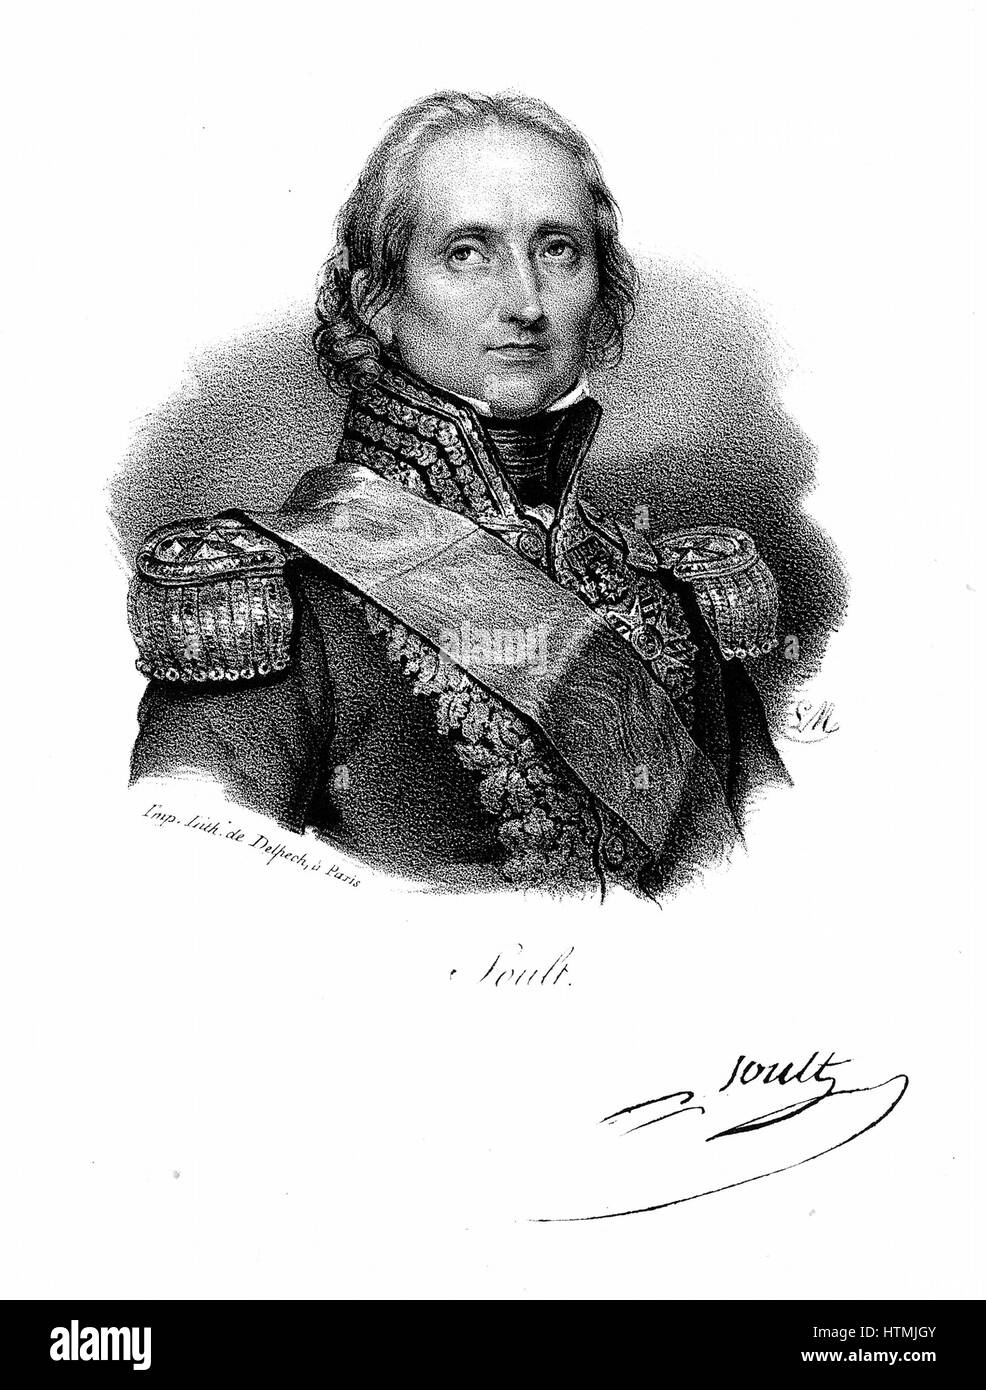 Nicolas Jean de Dieu Soult (1769-1851) French soldier; created Marshal of France by Napoleon 1804; French commander in Spain and Portugal. Lithograph c1830 Stock Photo